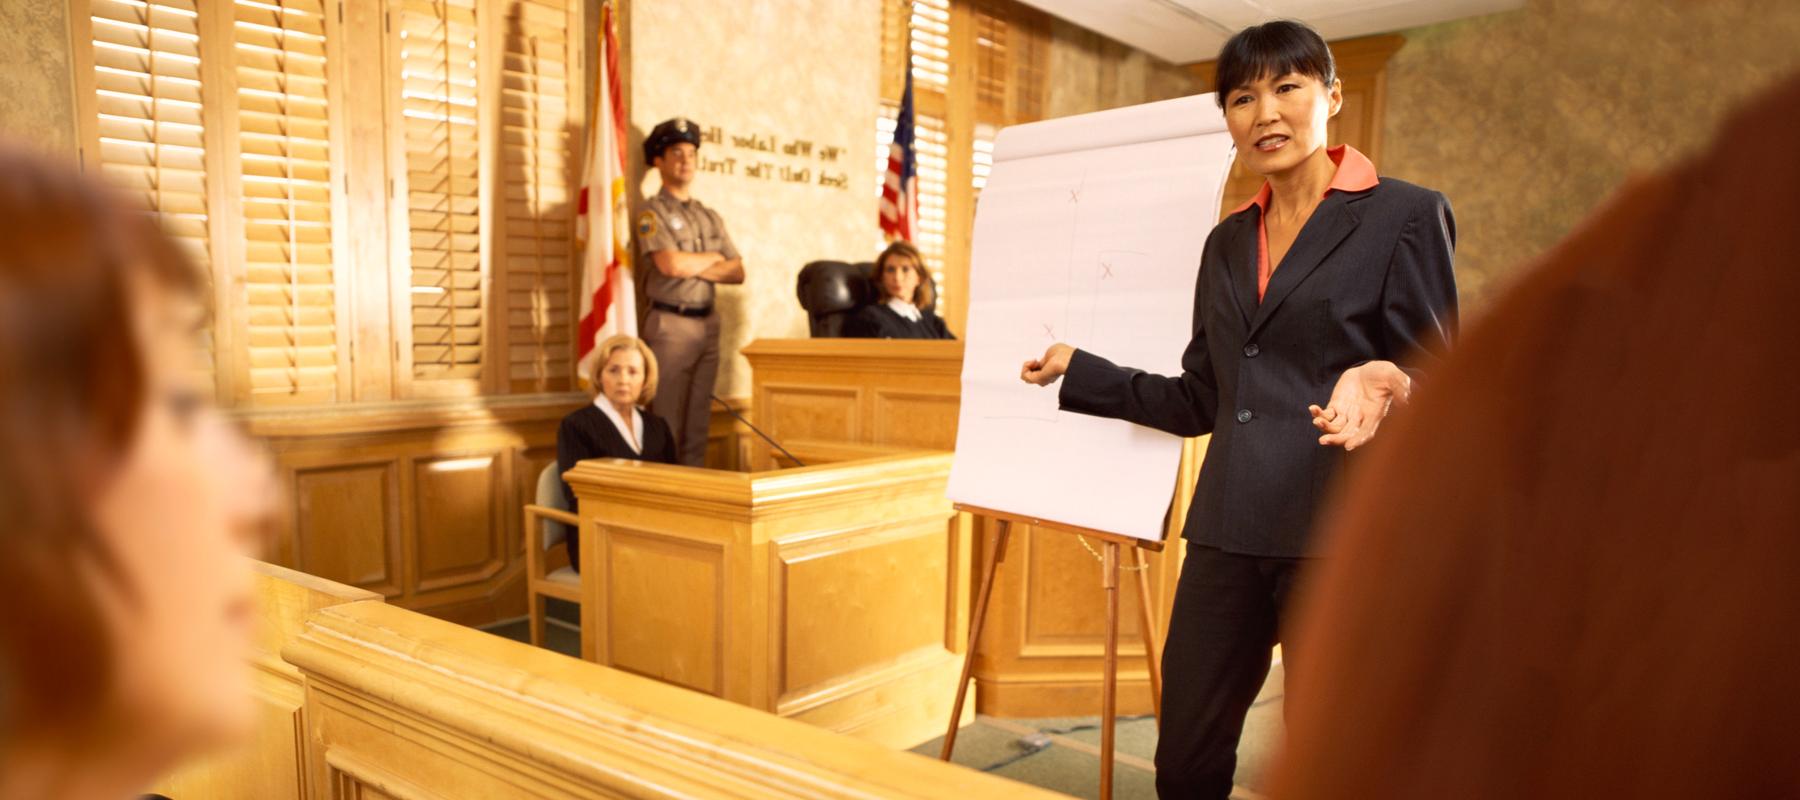 female in a suit talks to a jury in a court room